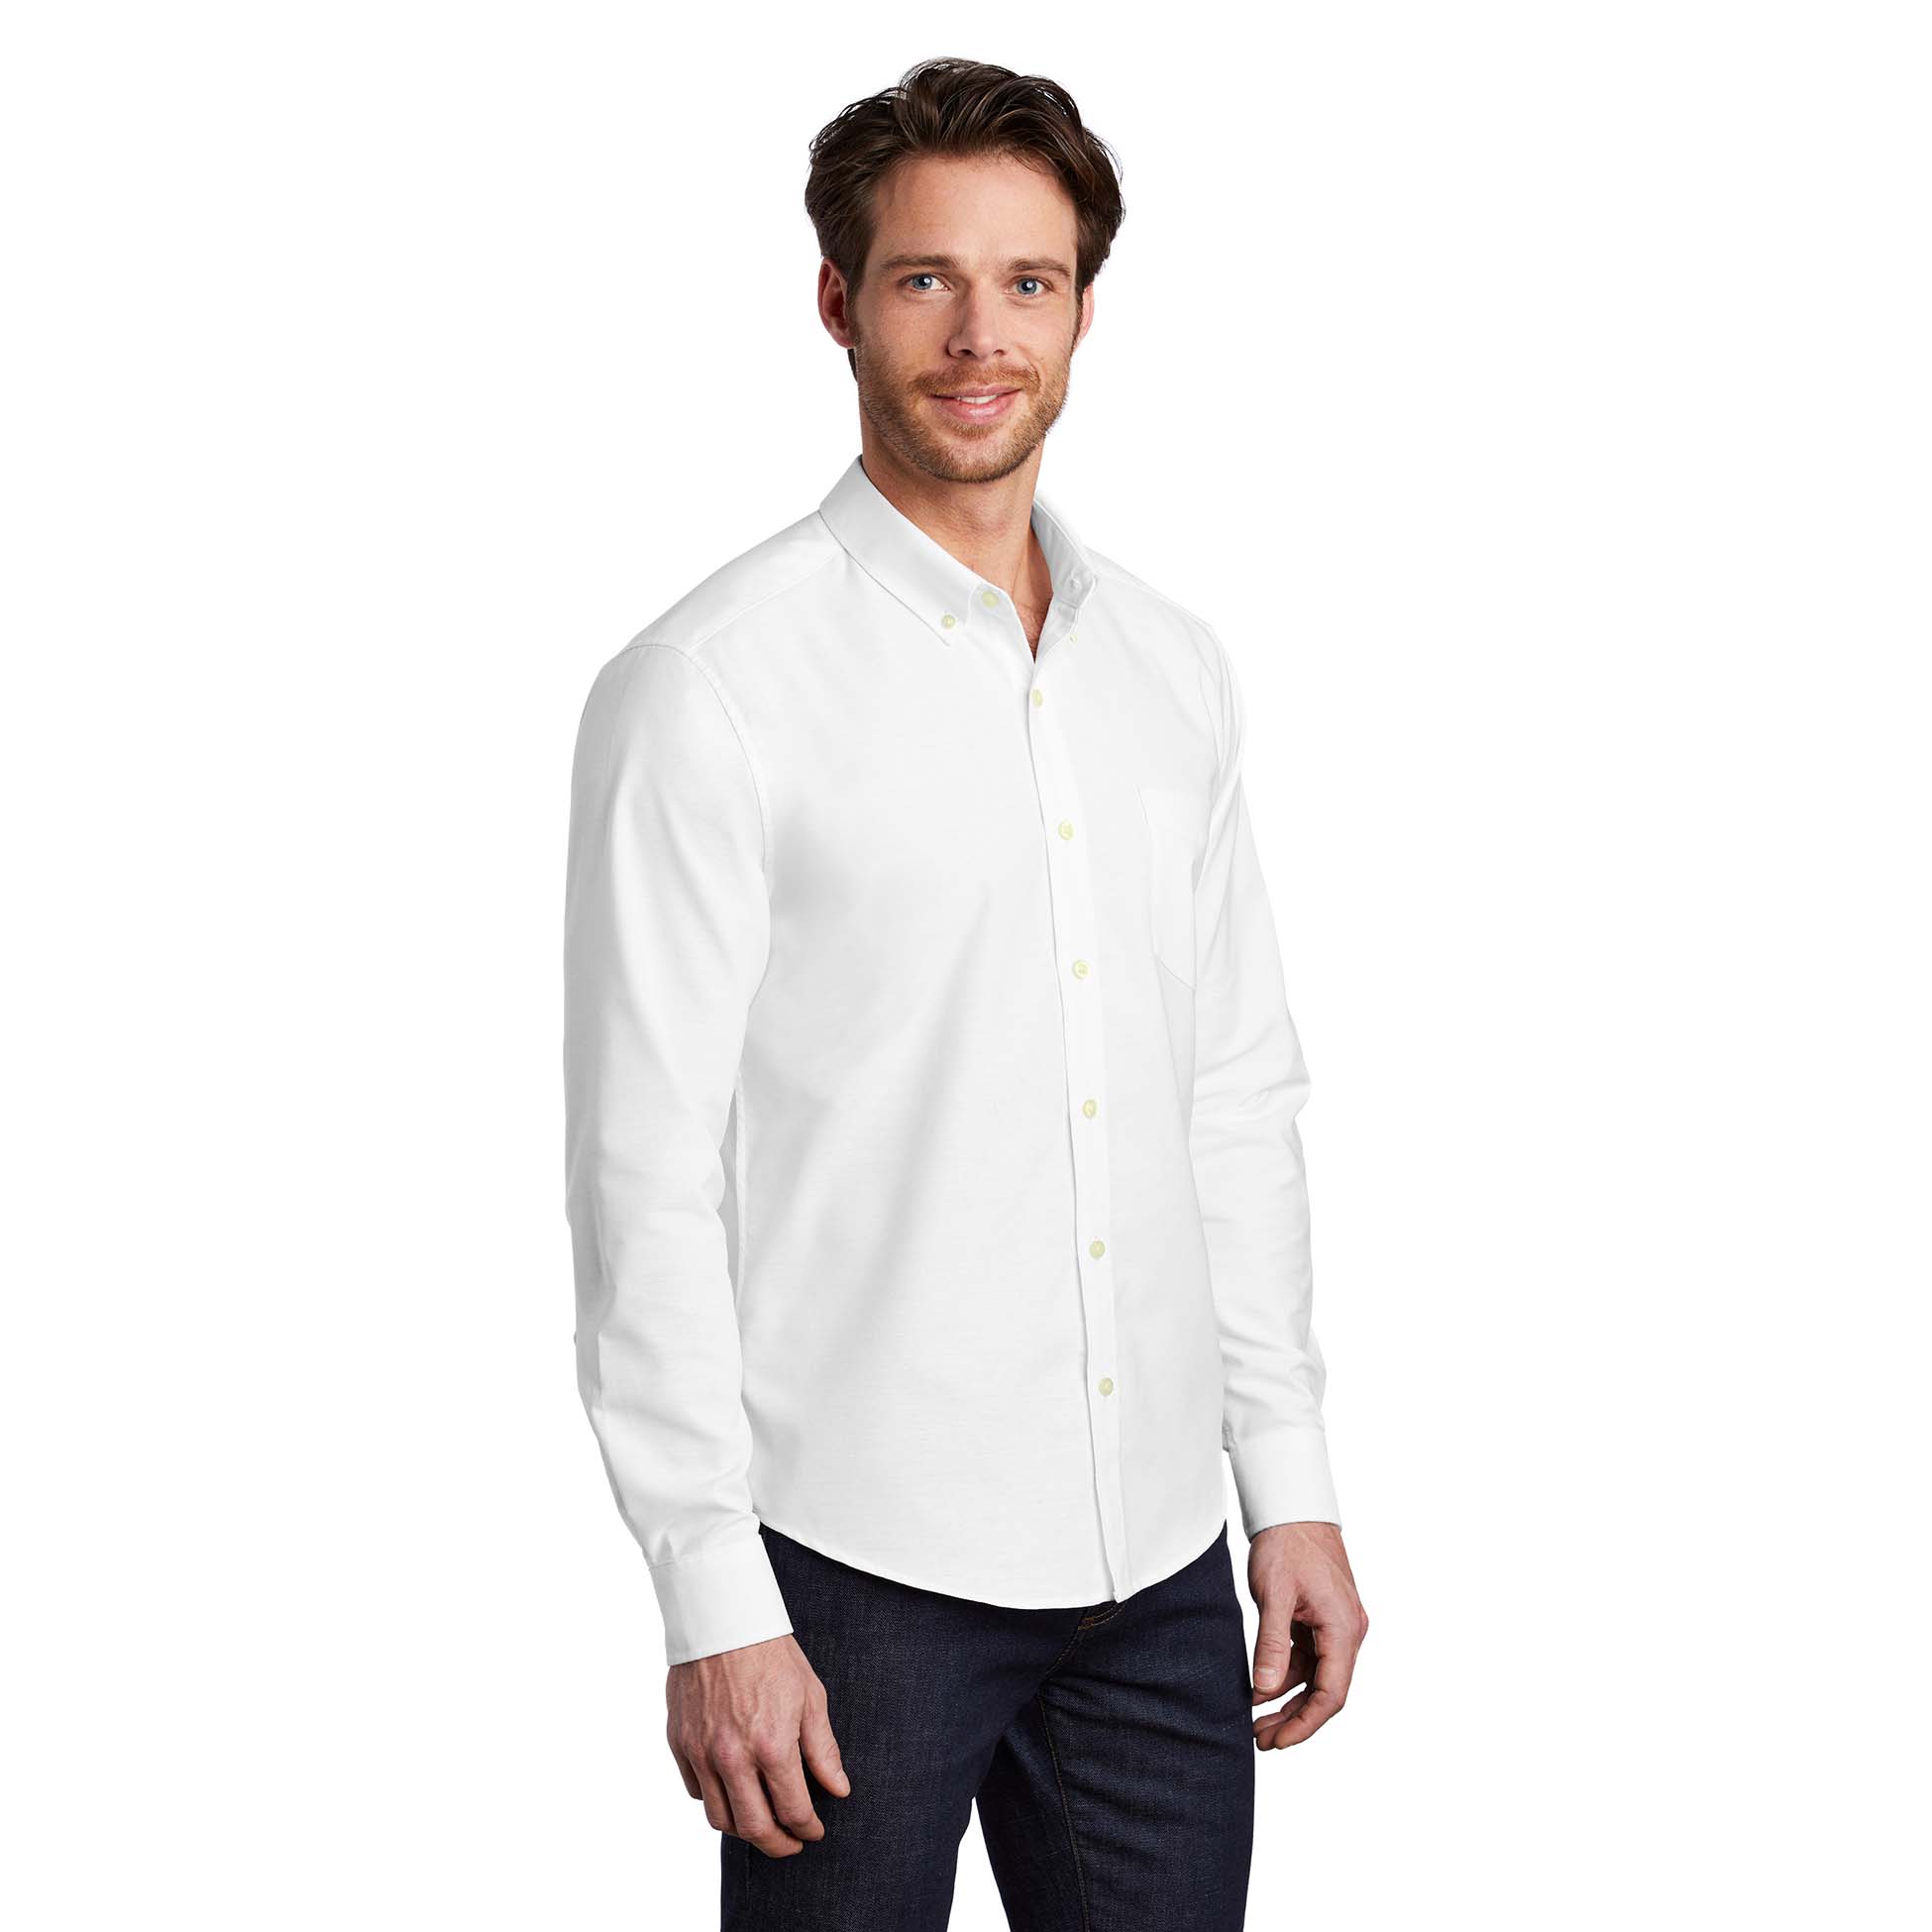 Port Authority S651 Untucked Fit SuperPro Oxford Shirt - White | Full ...